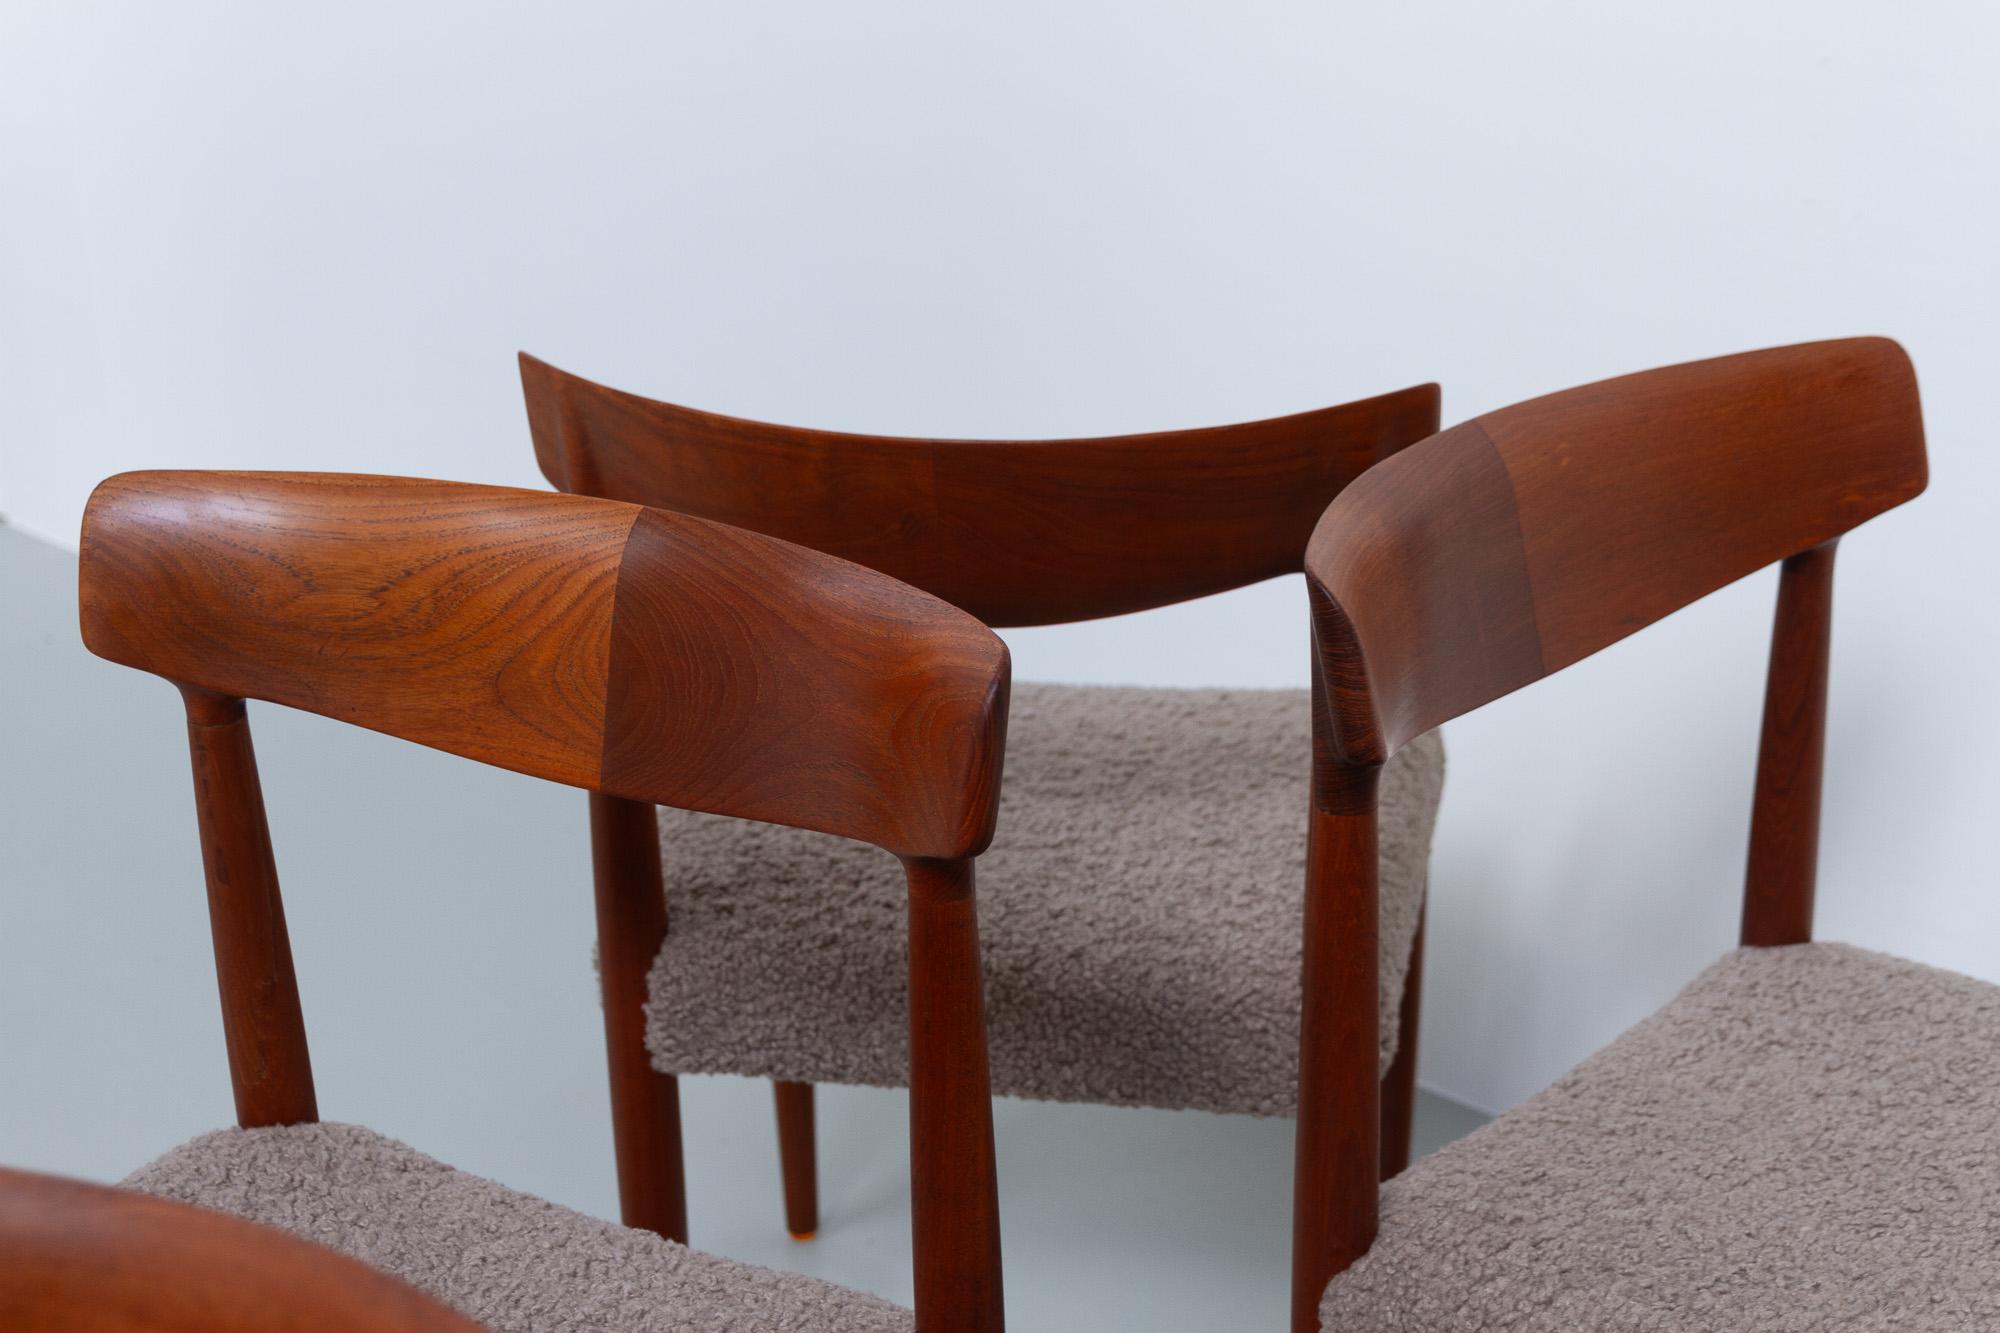 Danish Modern Teak Dining Chairs by Knud Færch for Slagelse, 1960s. Set of 6. For Sale 10